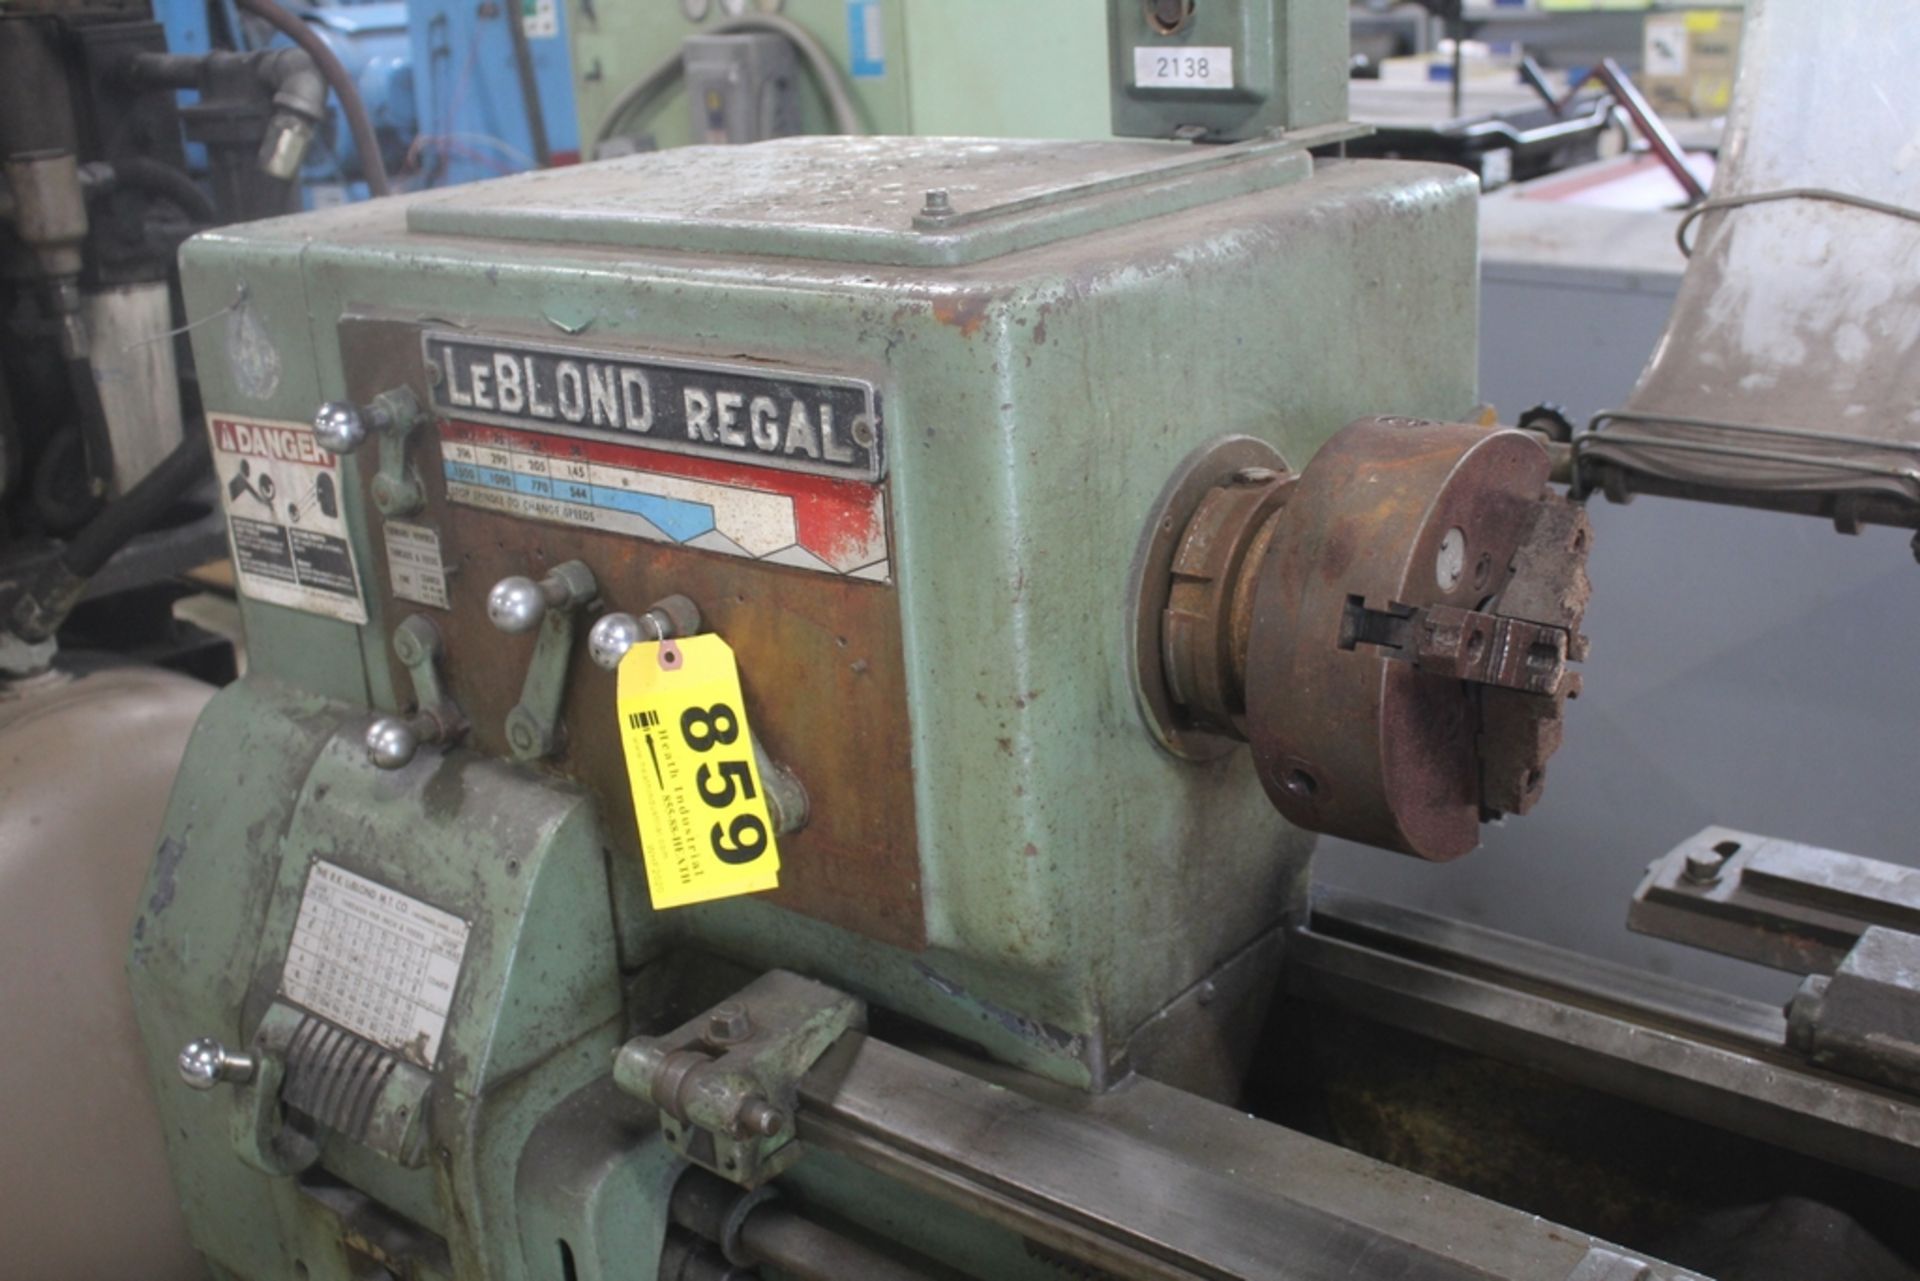 LEBLOND 19”X54” MODEL REGAL TOOLROOM LATHE, S/N 2F876, 1500 SPINDLE RPM, WITH 8” 3-JAW CHUCK, INCH - Image 2 of 6